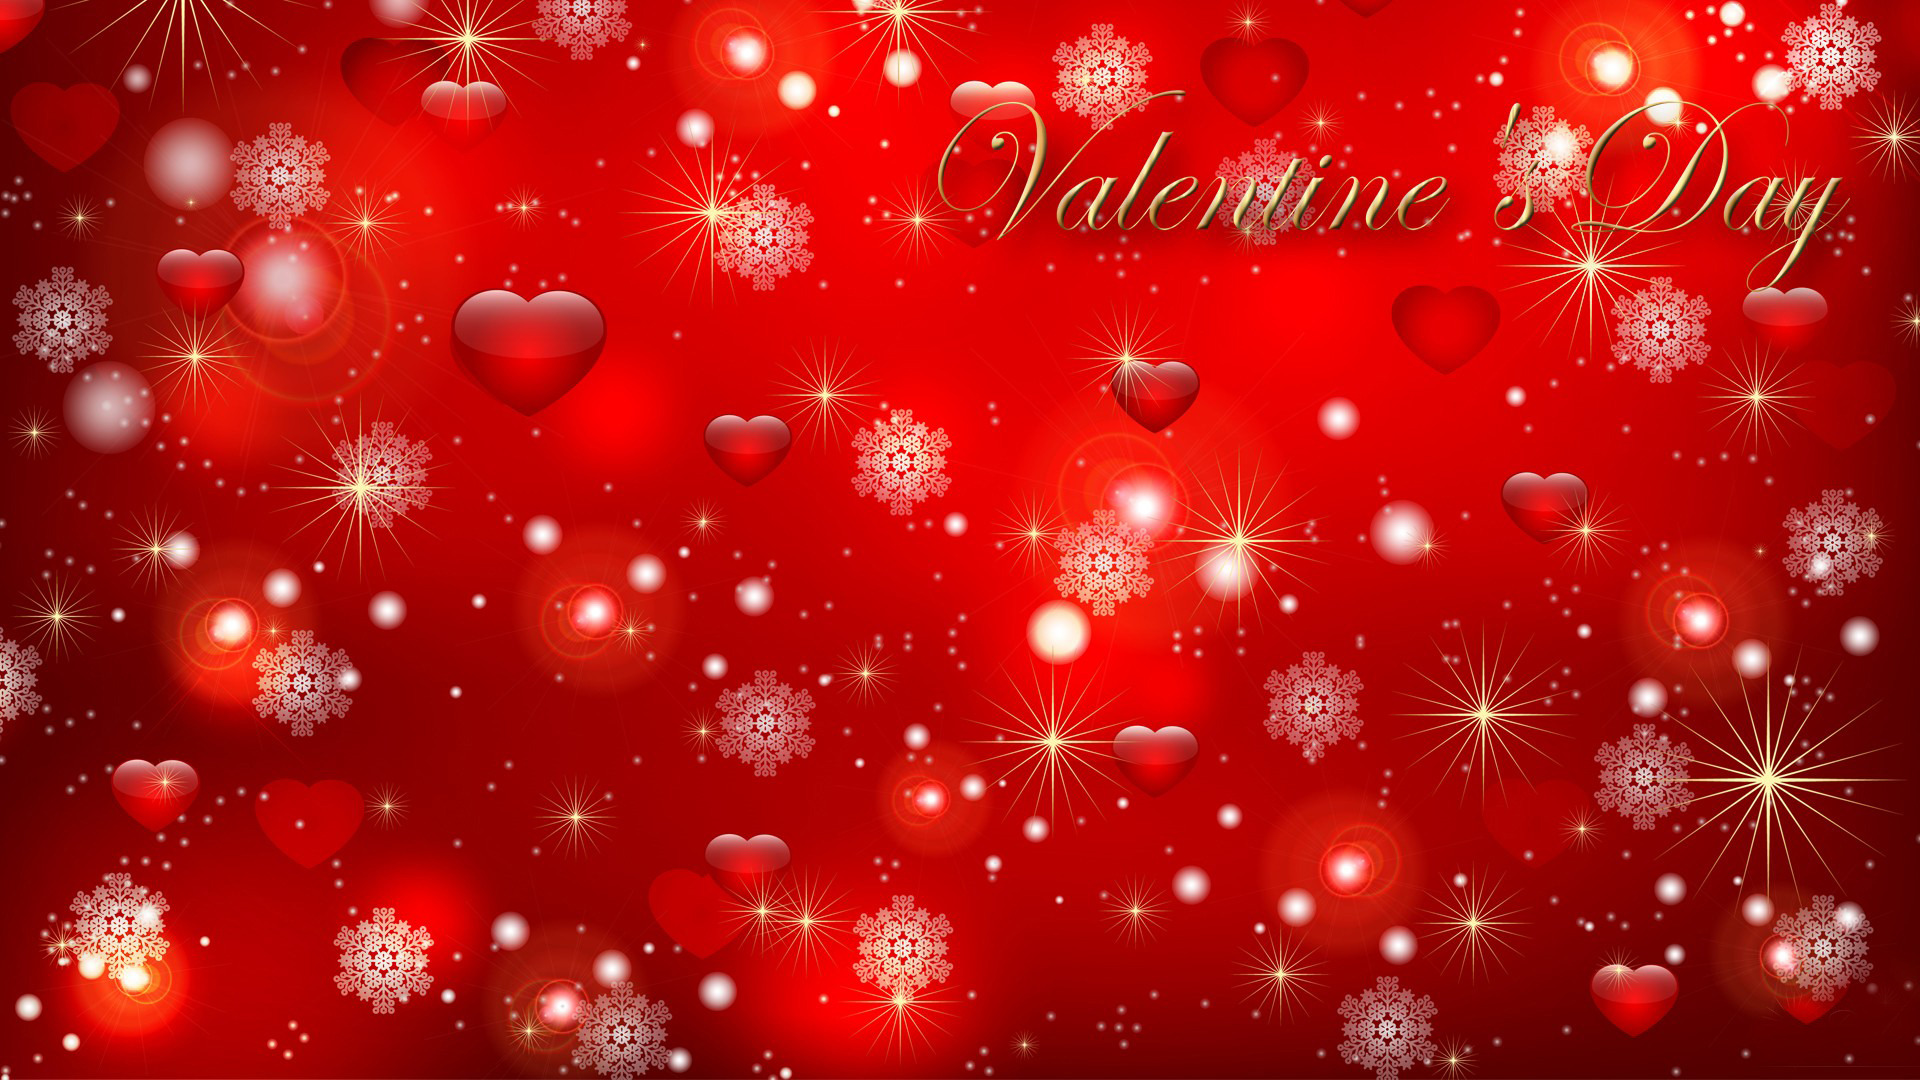 Valentine Day 2017 Images Pictures Wallpapers Free Download